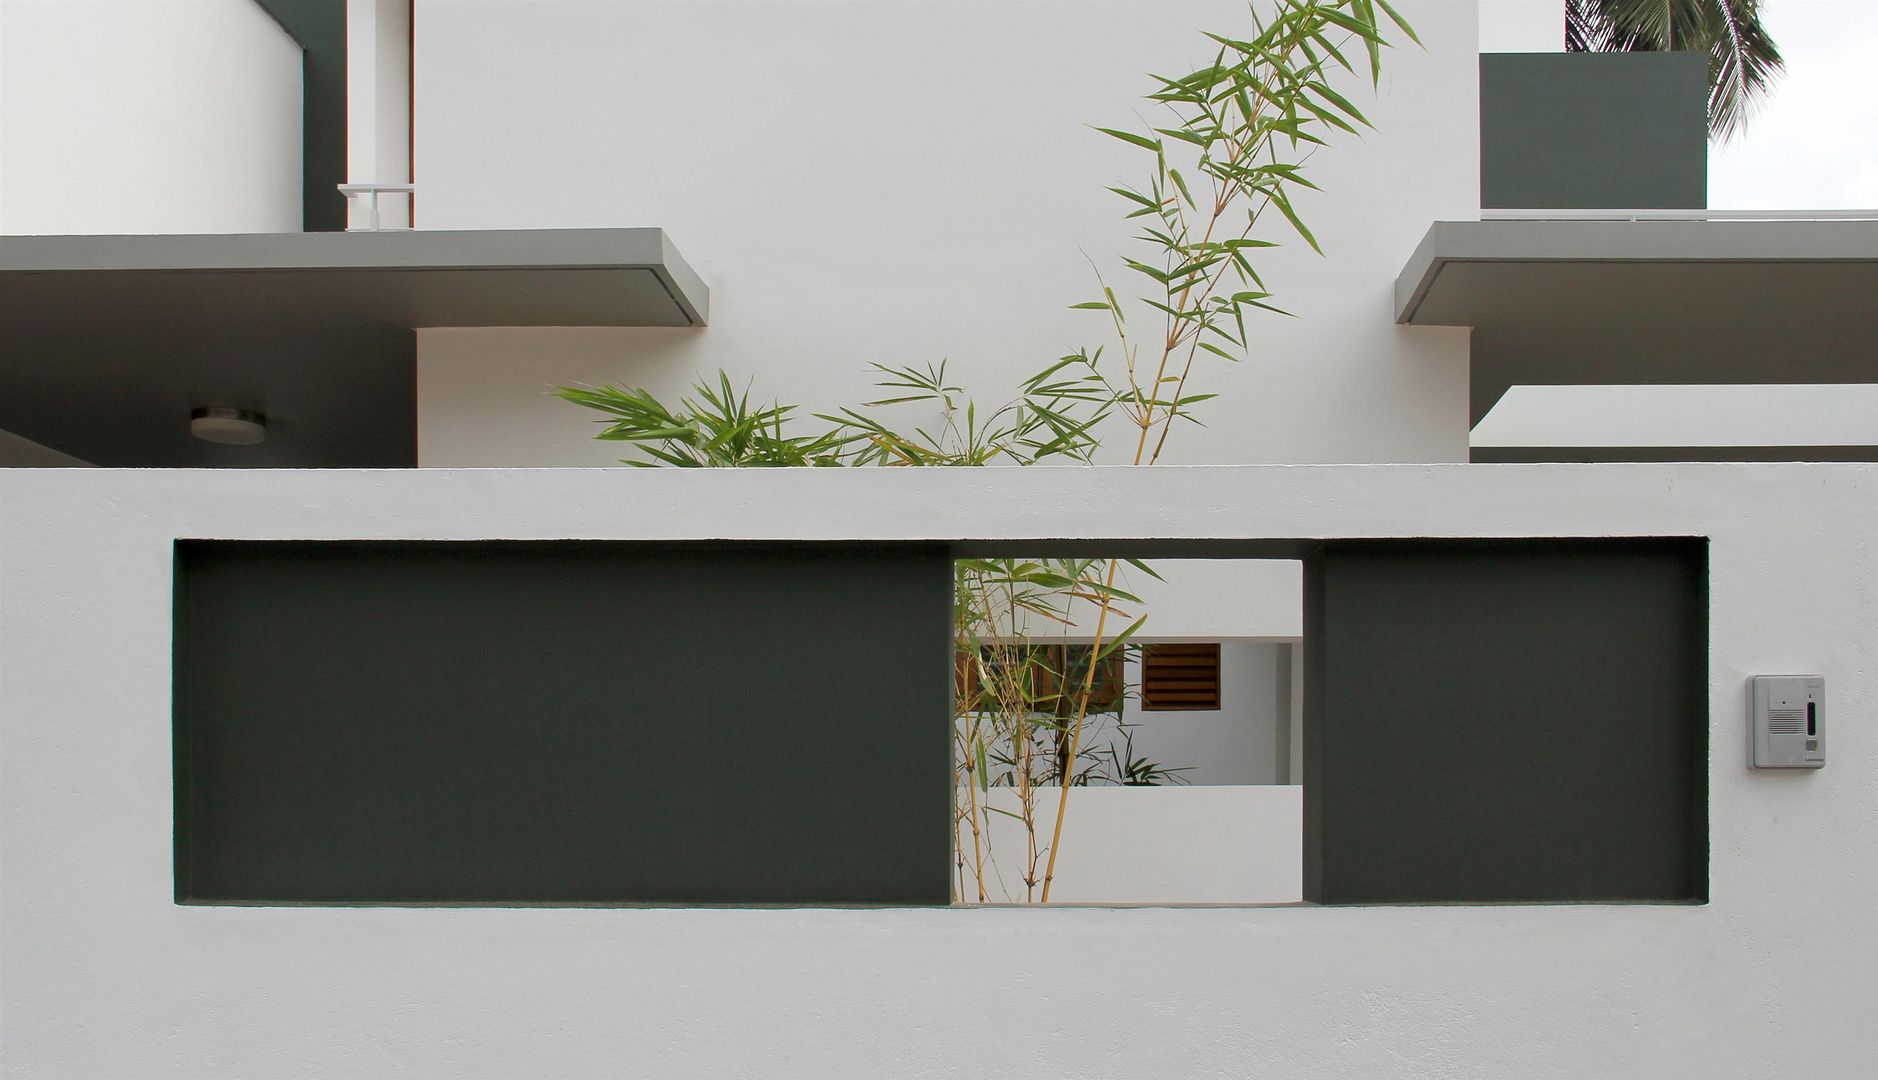 Residence for the Unknown Client-06, LIJO.RENY.architects LIJO.RENY.architects